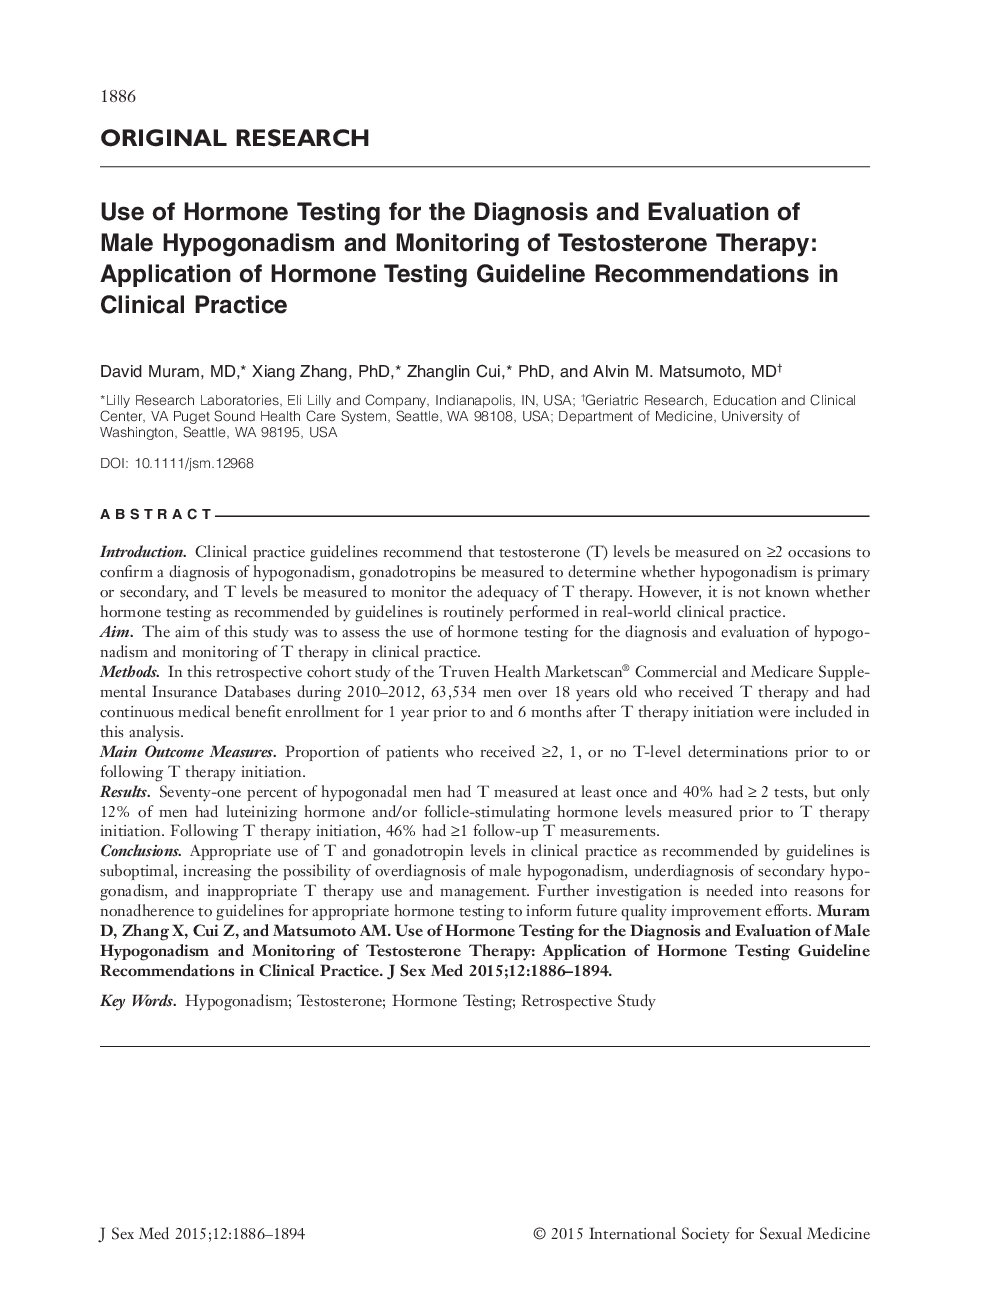 Use of Hormone Testing for the Diagnosis and Evaluation of Male Hypogonadism and Monitoring of Testosterone Therapy: Application of Hormone Testing Guideline Recommendations in Clinical Practice